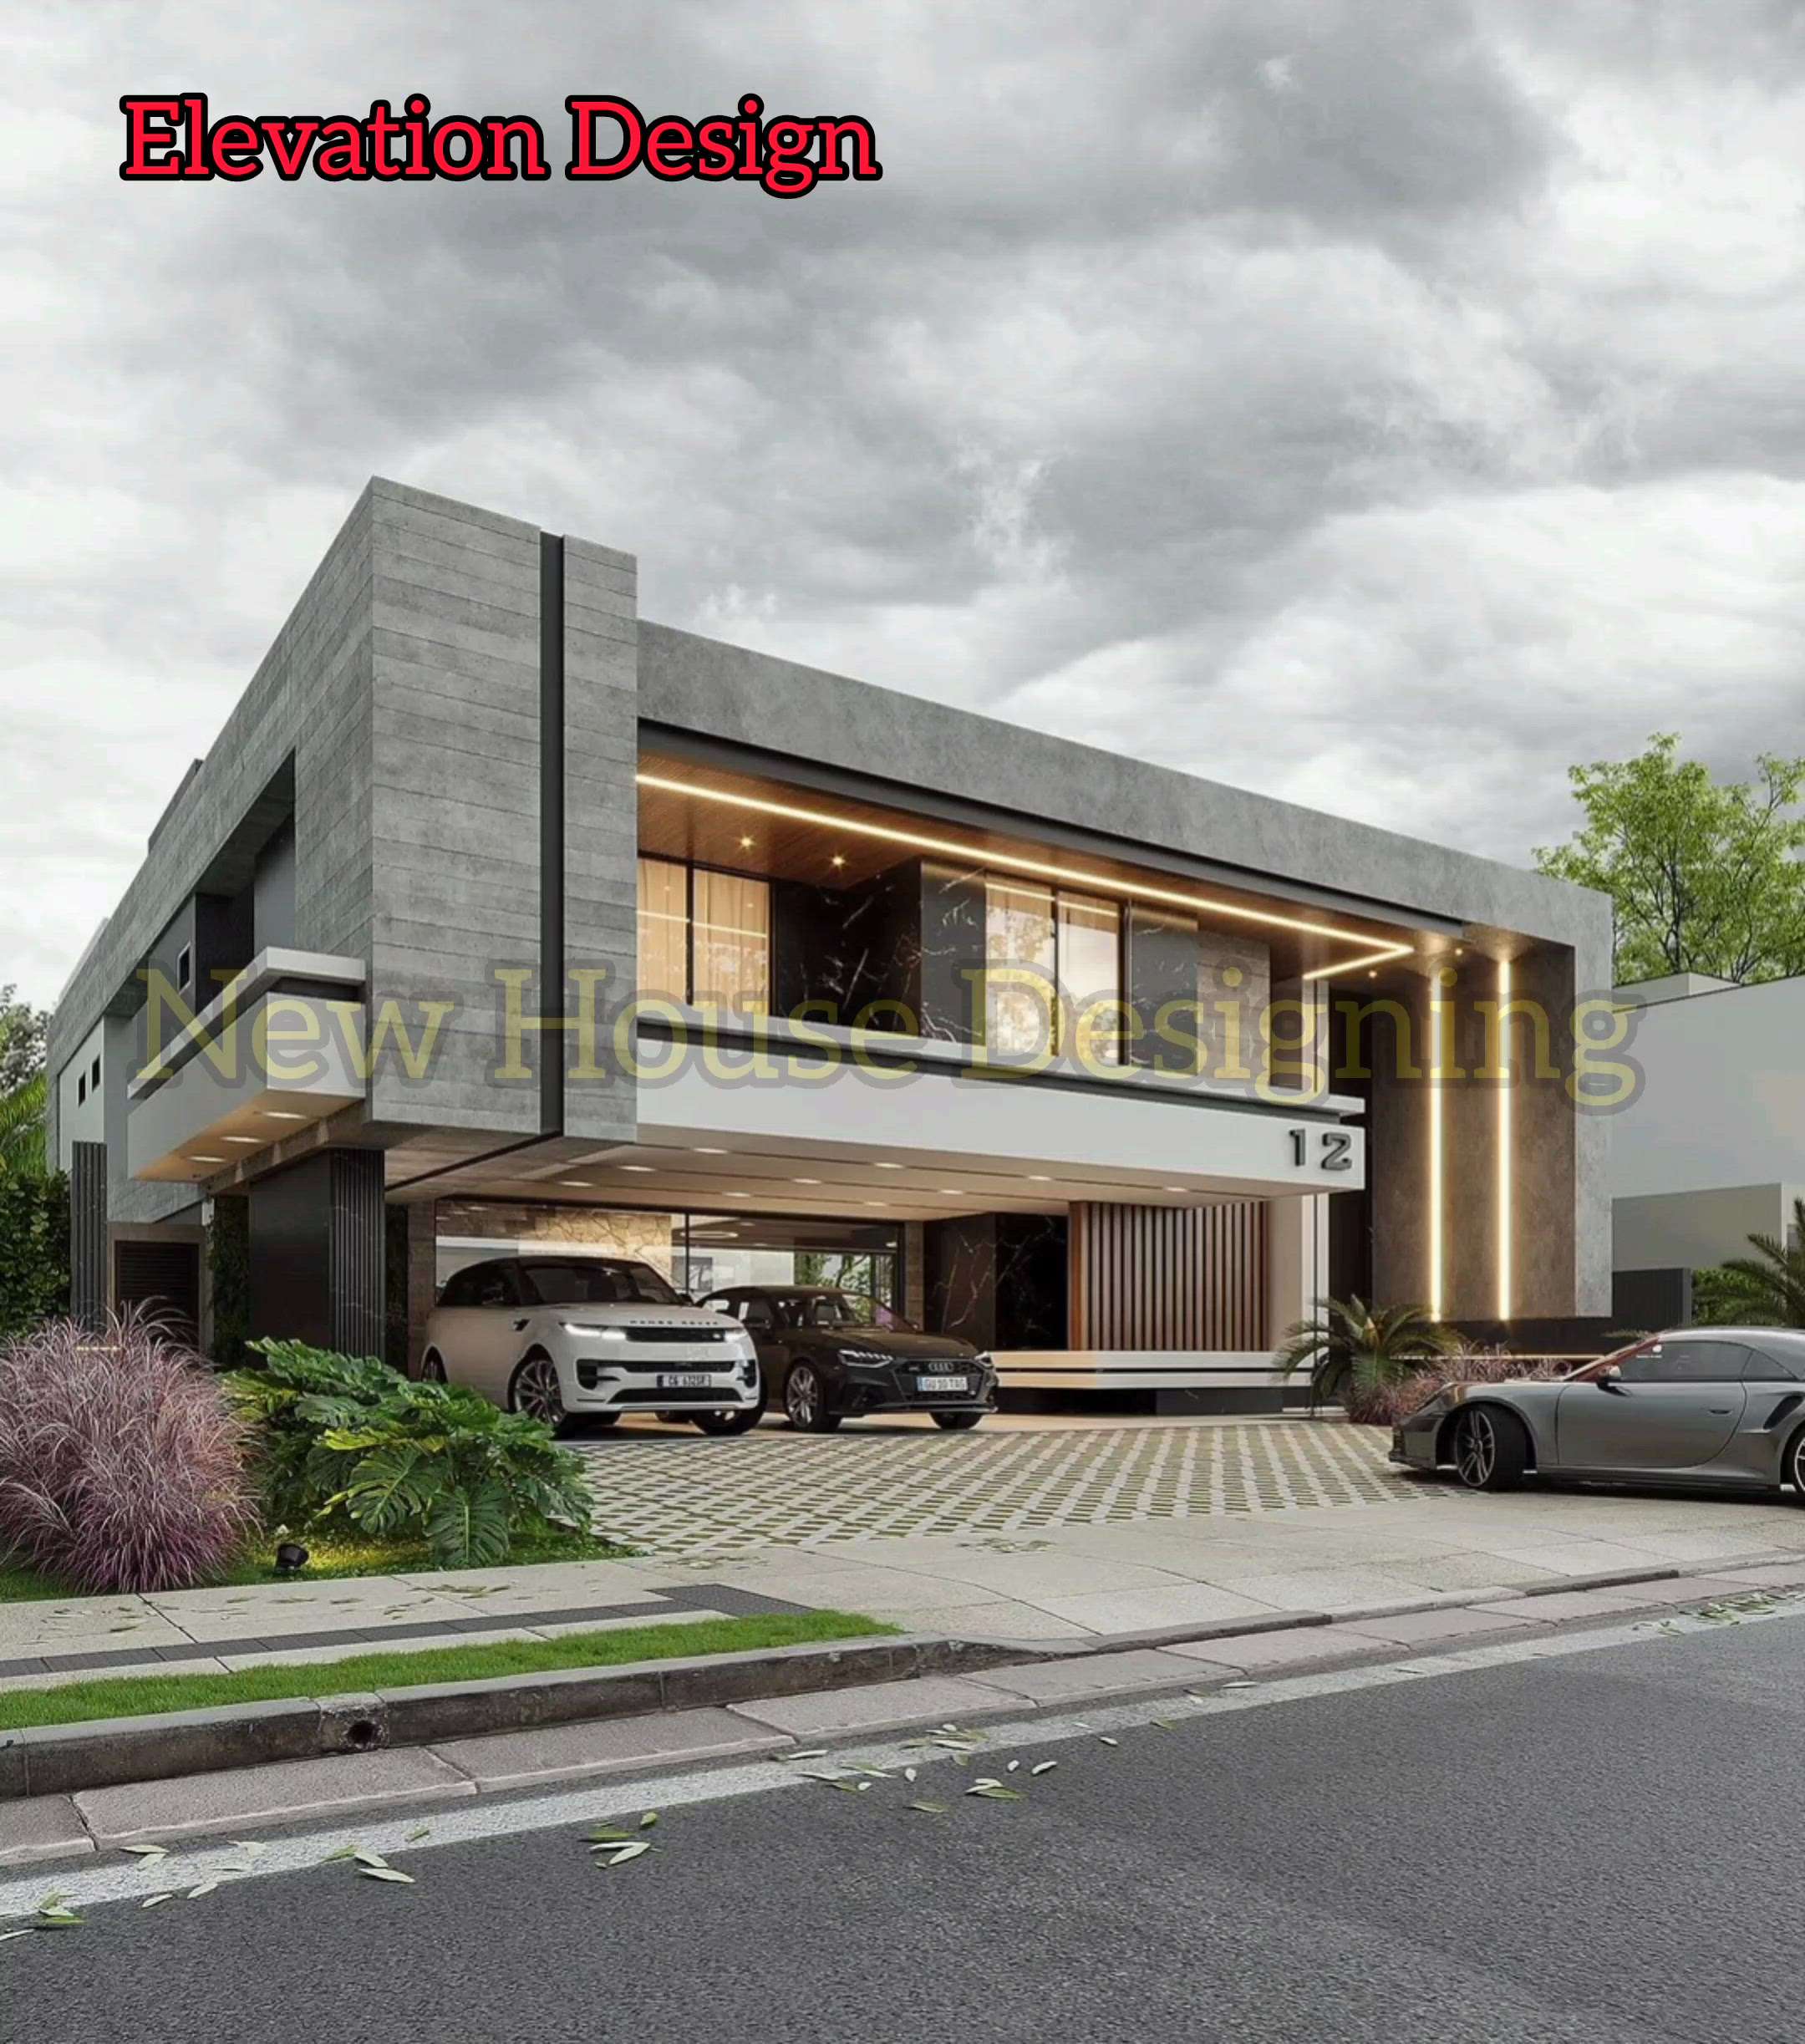 New House Designing.. Call Now For House Design. & Interior design 7877377579



#elevation #architecture #design #interiordesign #construction #elevationdesign #architect #love #interior #d #exteriordesign #motivation #art #architecturedesign #civilengineering #u #autocad #growth #interiordesigner #elevations #drawing #frontelevation #architecturelovers #home #facade #revit #vray #homedecor #selflove #instagood



#designer #explore #civil #dsmax #building #exterior #delevation #inspiration #civilengineer #nature #staircasedesign #explorepage #healing #sketchup #rendering #engineering #architecturephotography #archdaily #empowerment #planning #artist #meditation #decor #housedesign #render #house #lifestyle #life #mountains #buildingelevation